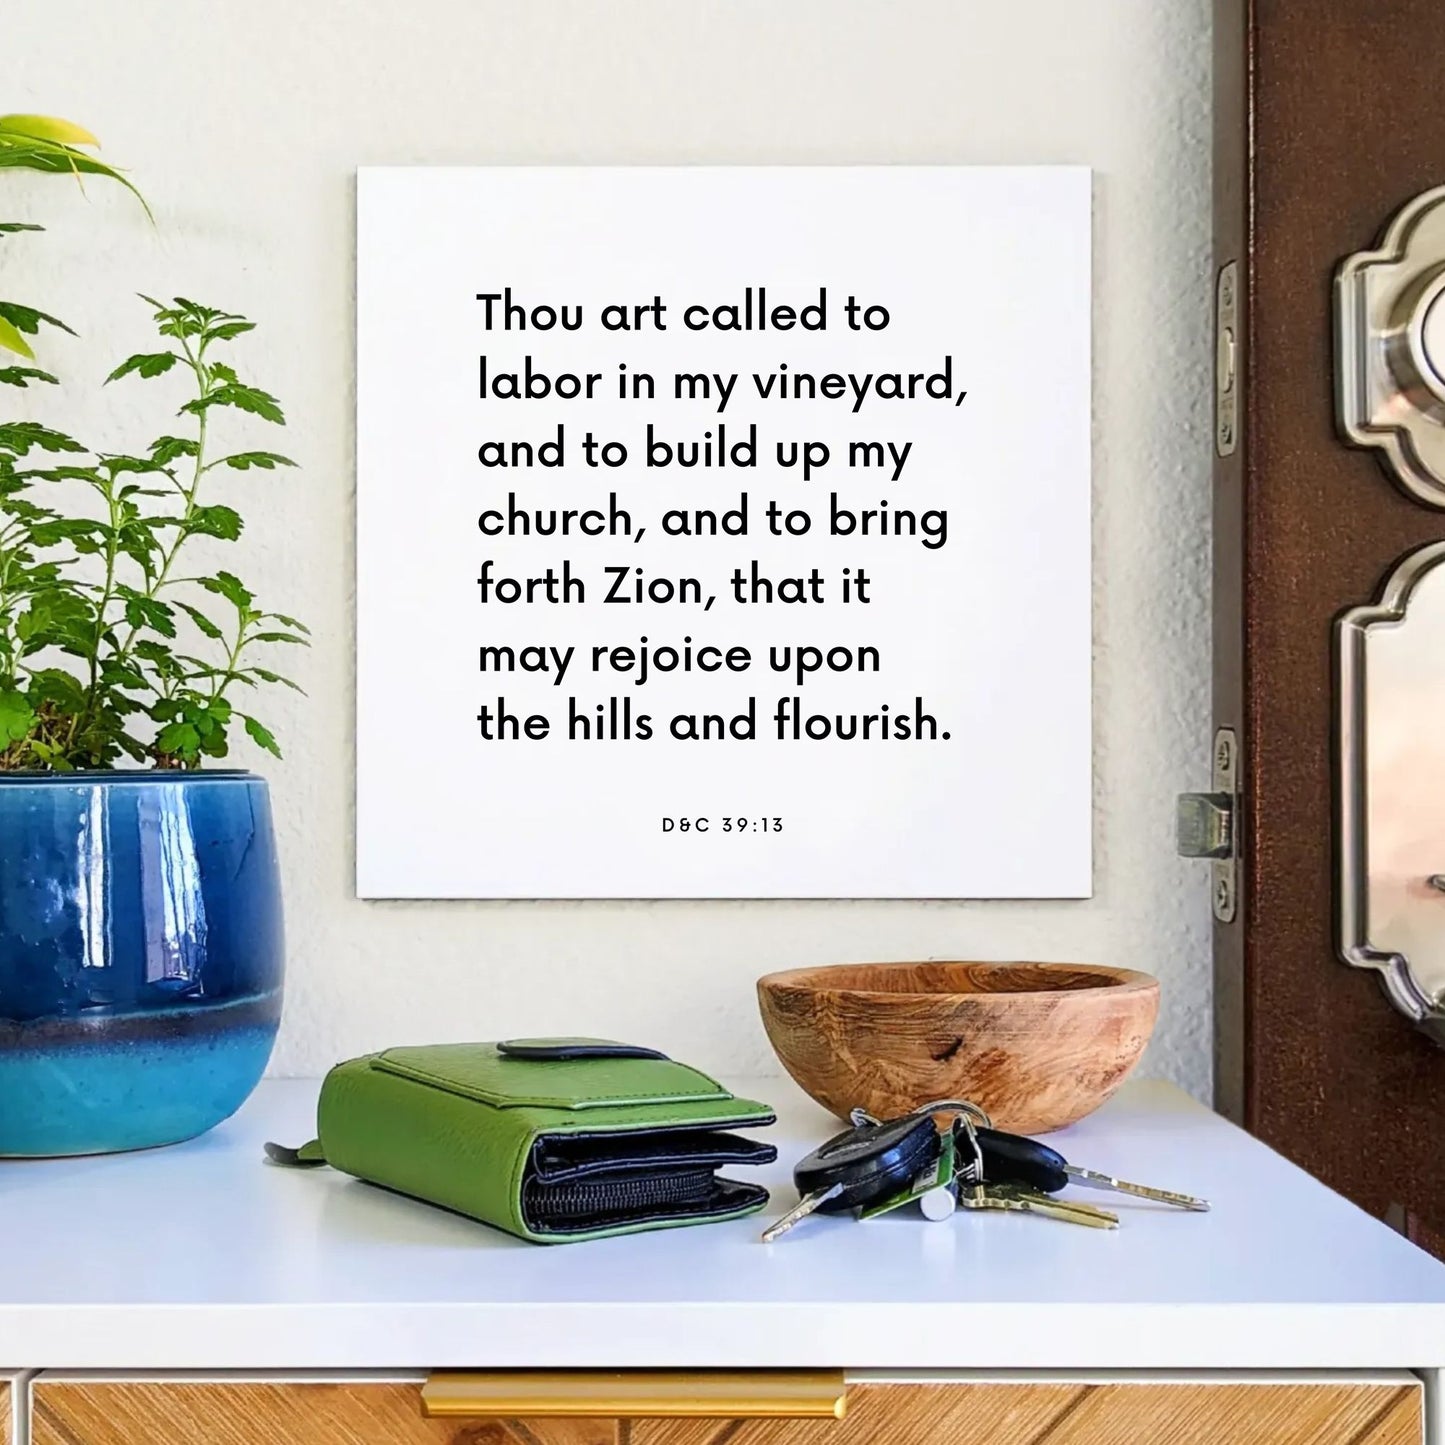 Entryway mouting of the scripture tile for D&C 39:13 - "Thou art called to labor in my vineyard"